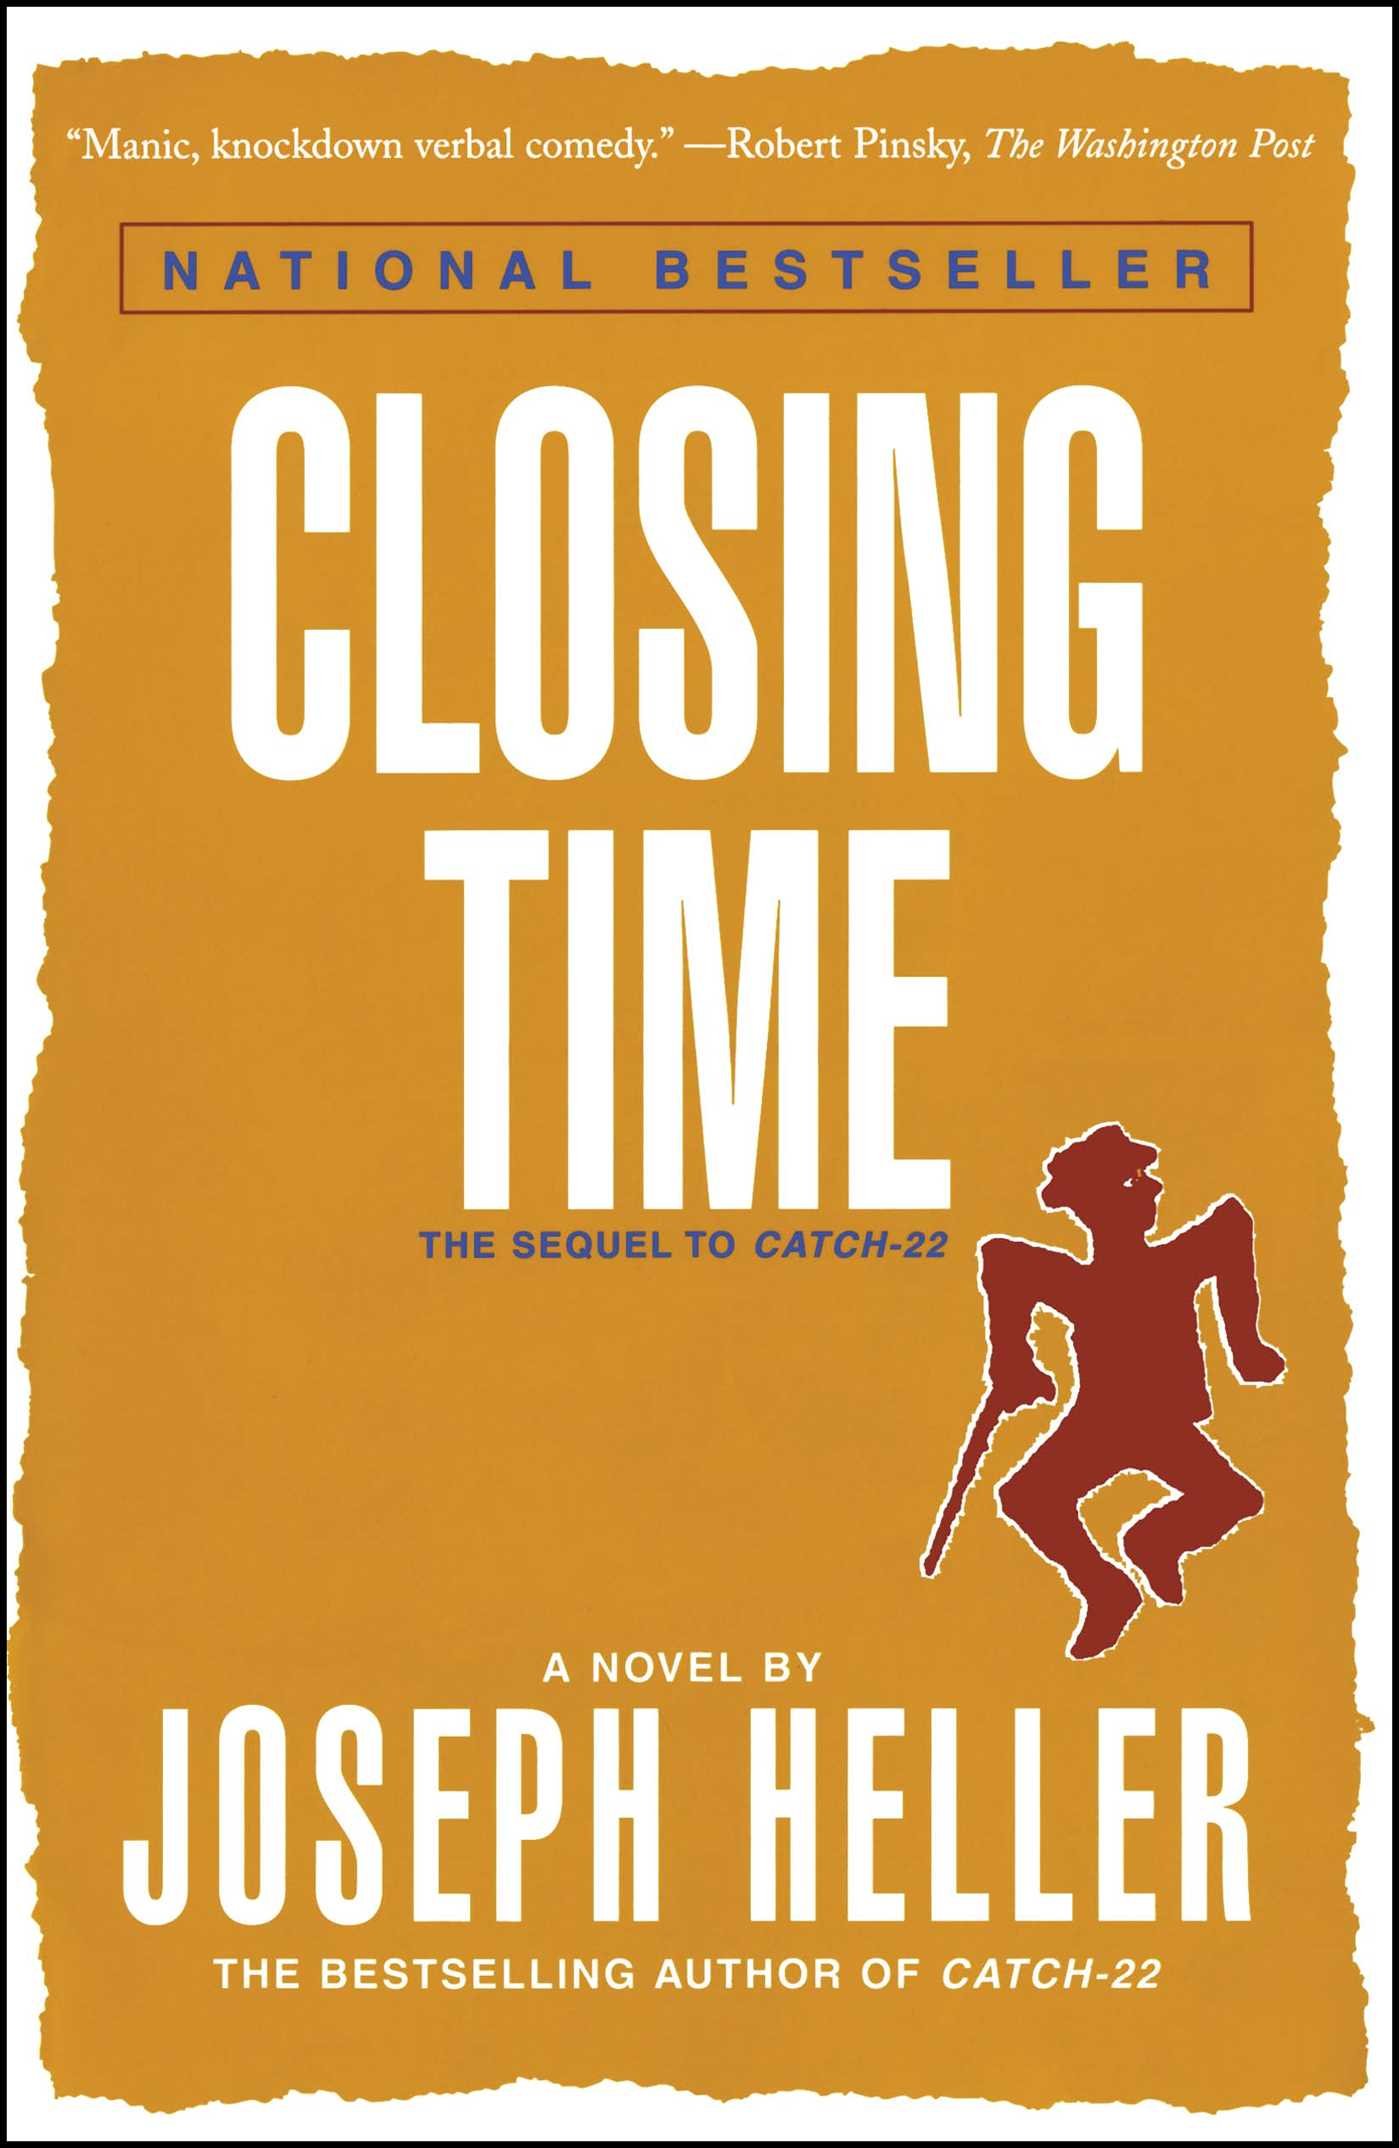 Closing Time: The Sequel to Catch-22: Joseph Heller: 9780684804507:  Traveller Location: Books